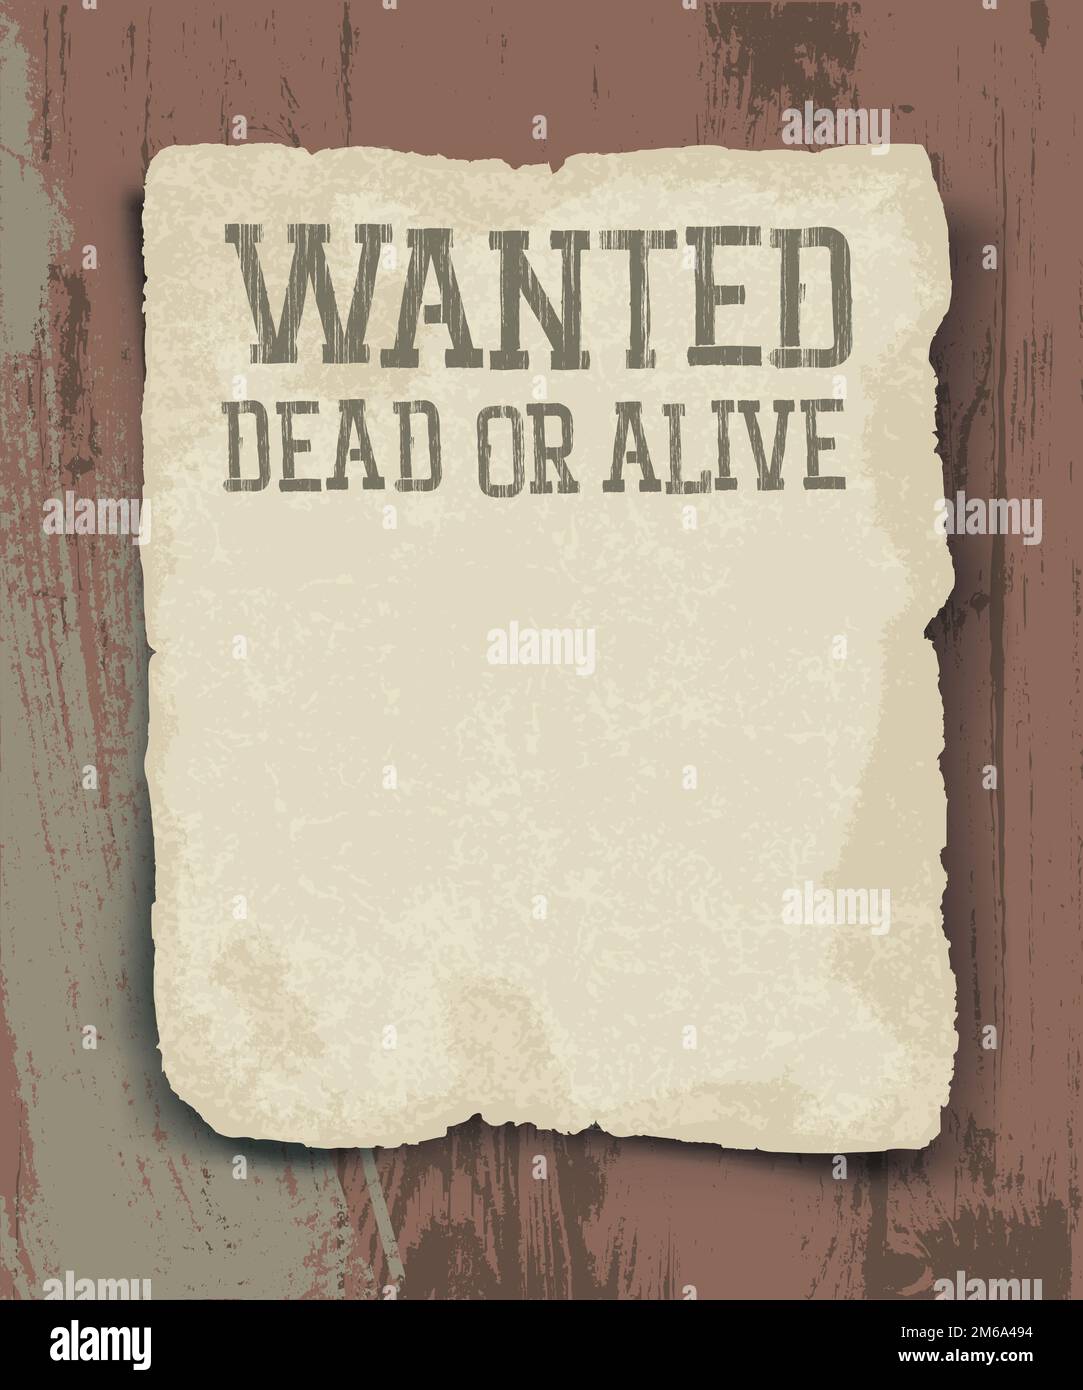 Premium Vector  Western wanted dead or alive vintage poster